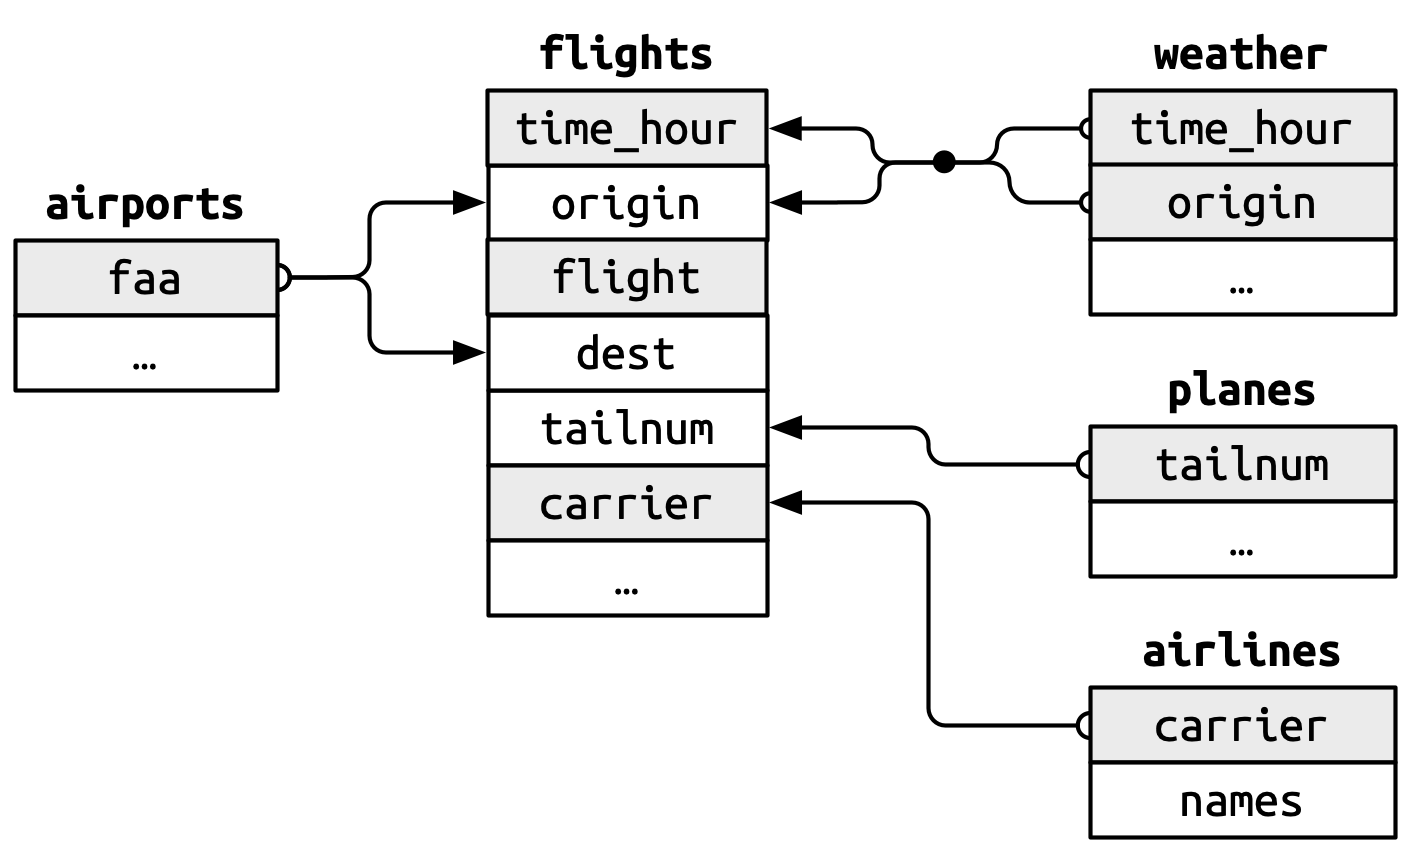 The relationships between airports, planes, flights, weather, and airlines datasets from the nycflights13 package. airports$faa connected to the flights$origin and flights$dest. planes$tailnum is connected to the flights$tailnum. weather$time_hour and weather$origin are jointly connected to flights$time_hour and flights$origin. airlines$carrier is connected to flights$carrier. There are no direct connections between airports, planes, airlines, and weather data frames.